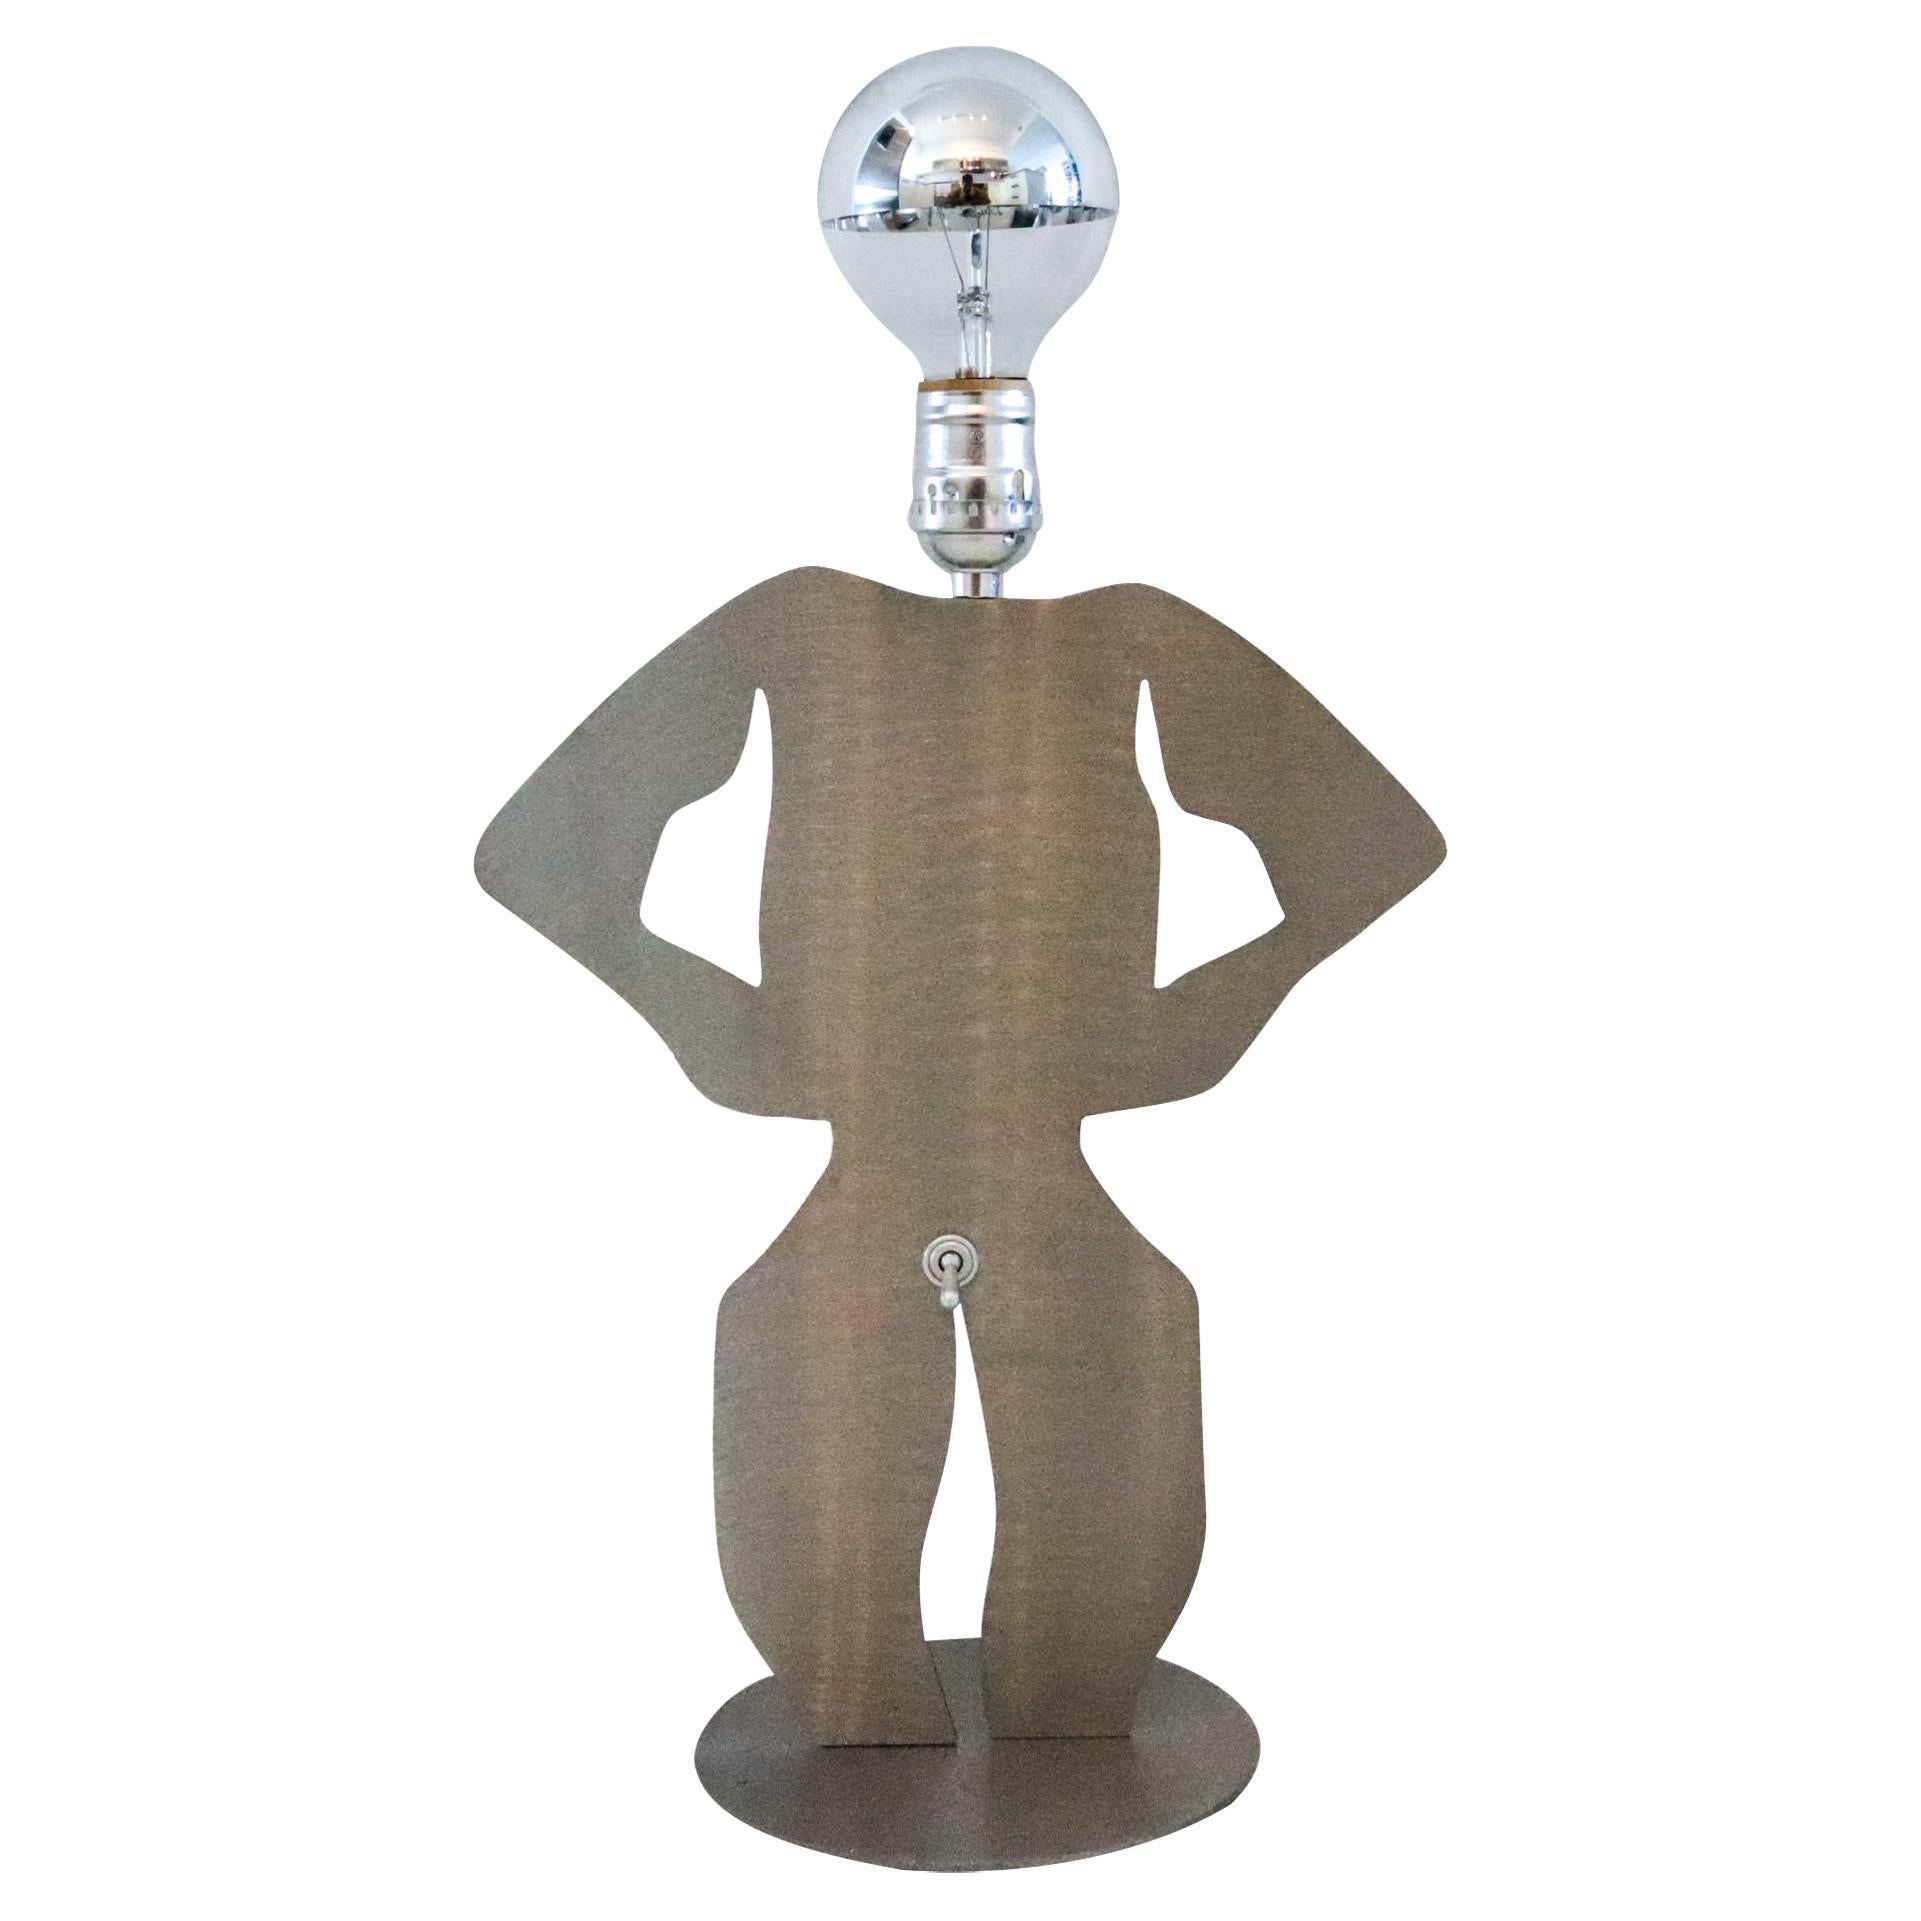 Postmodernist 1980 Memphis Pop-Art Lamp In Stainless Steel In The Shape of Man For Sale